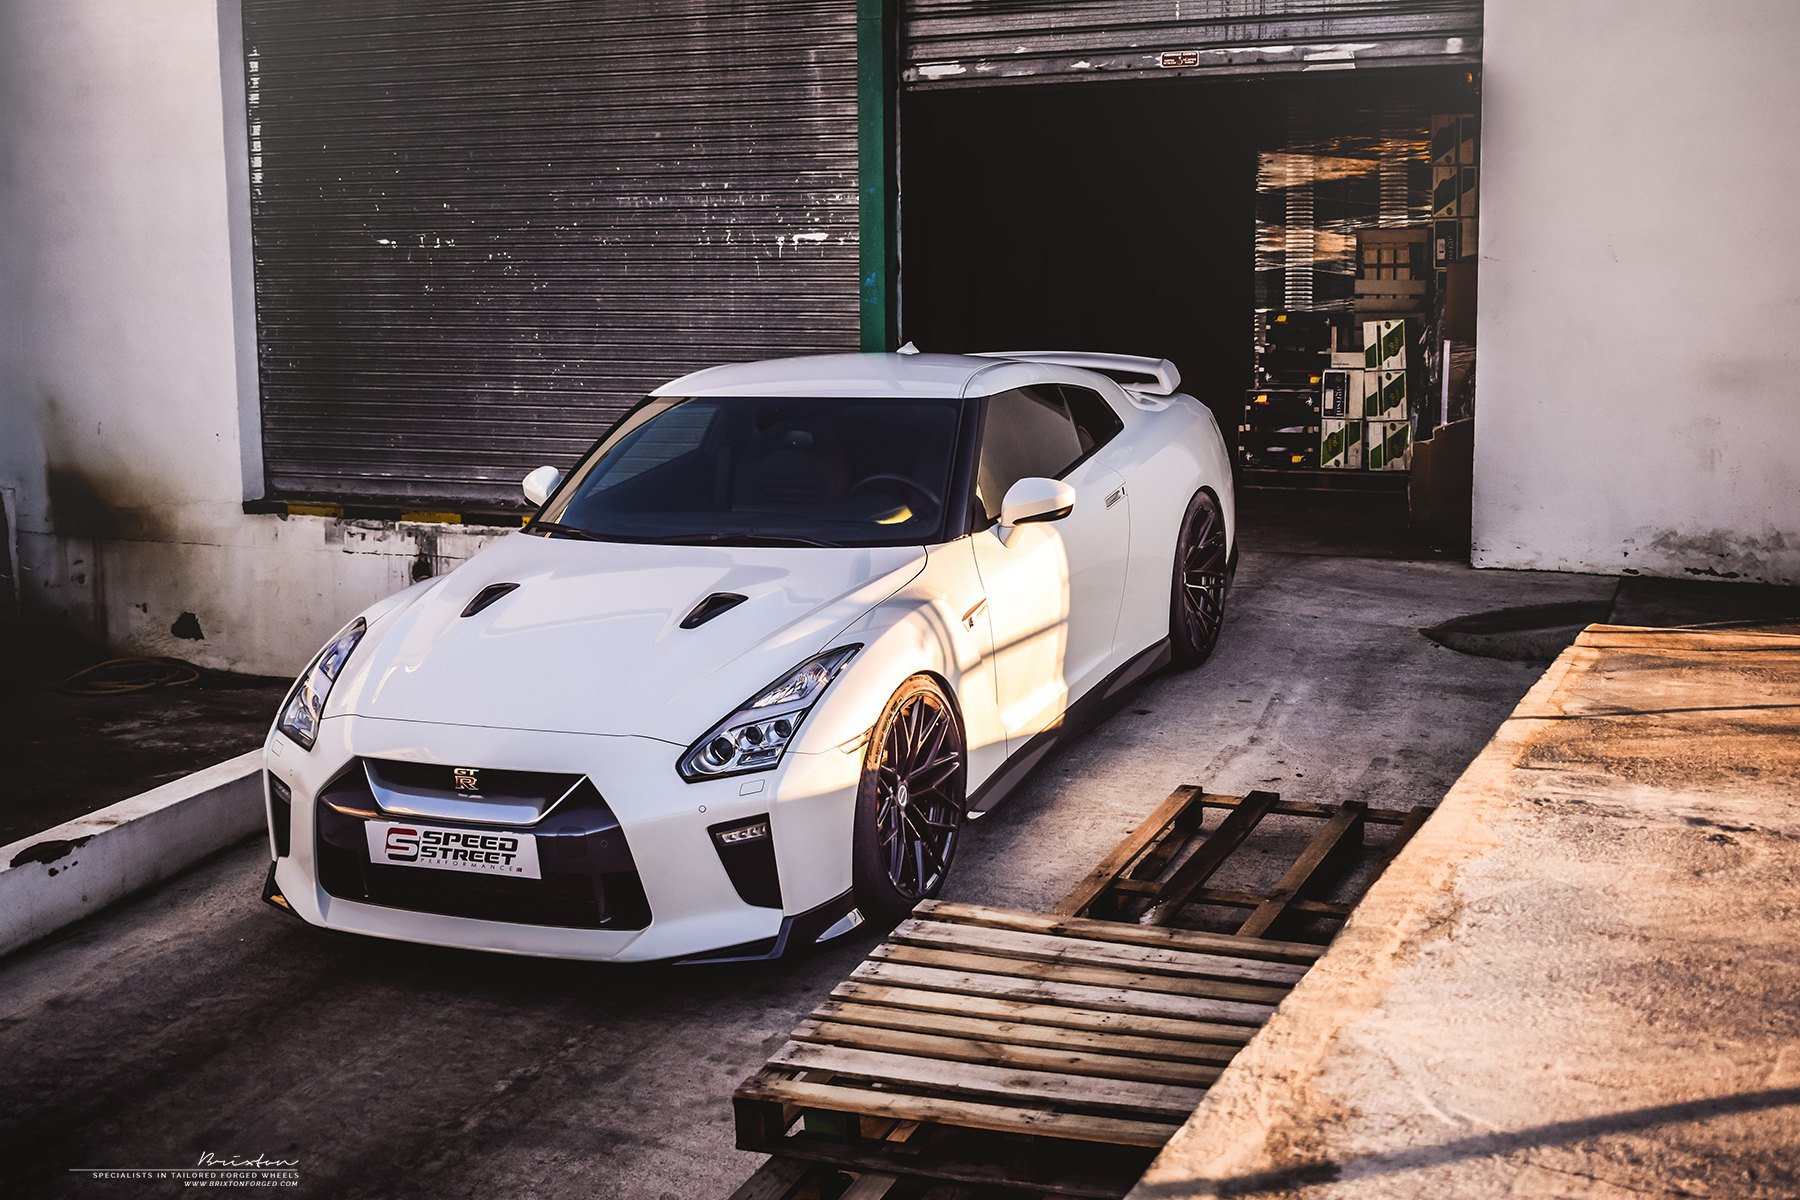 Custom Vented Hood on White Nissan GT-R - Photo by Brixton Forged Wheels